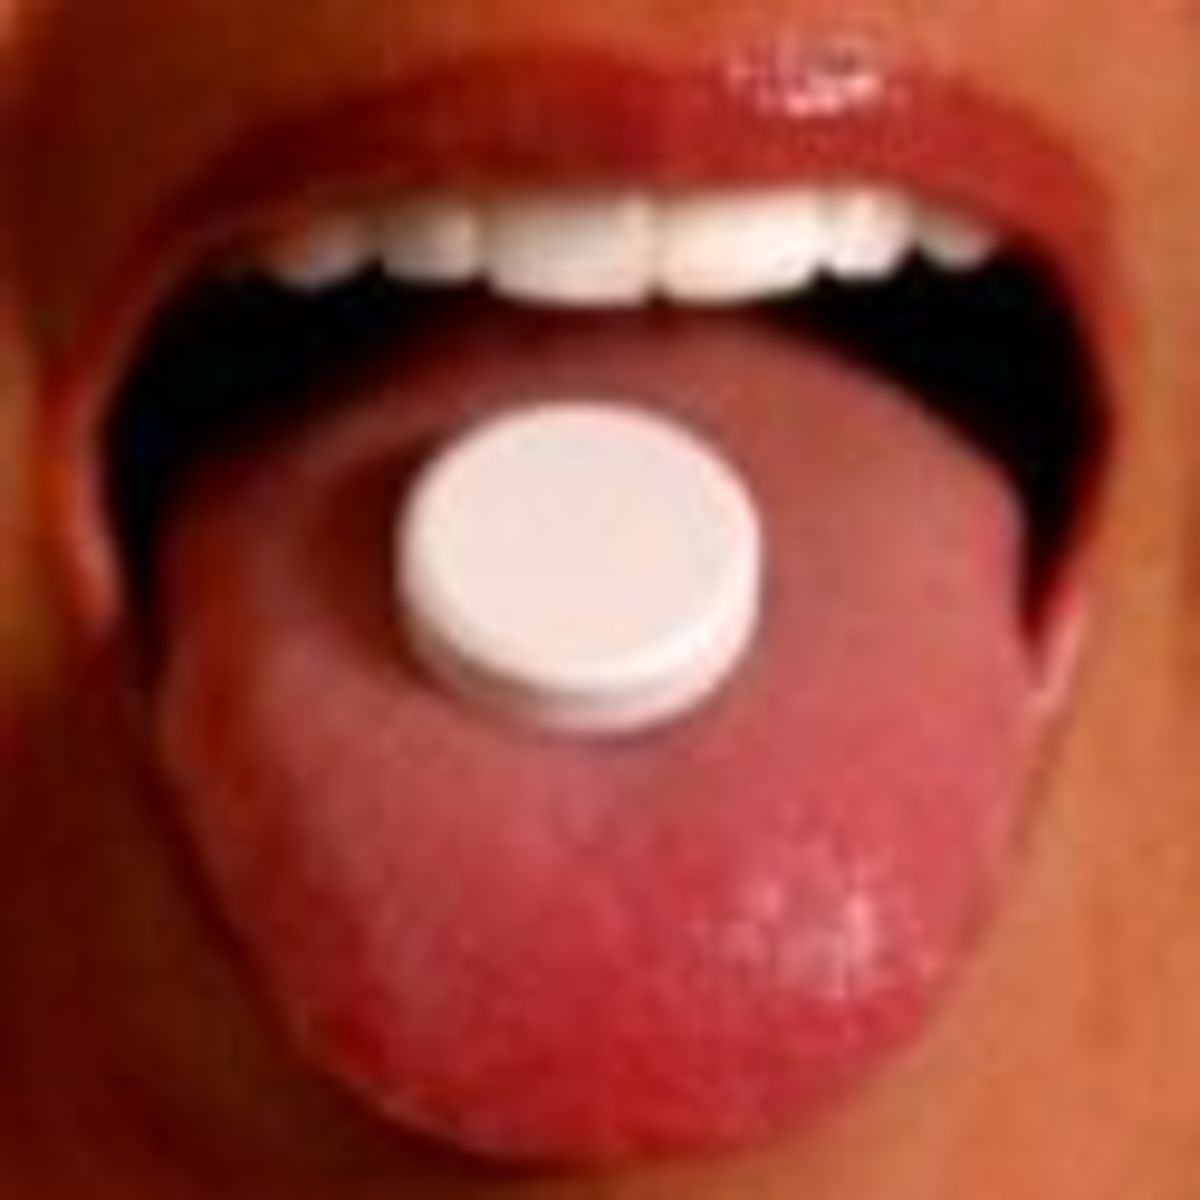 antacids are harmful to heartburn patients